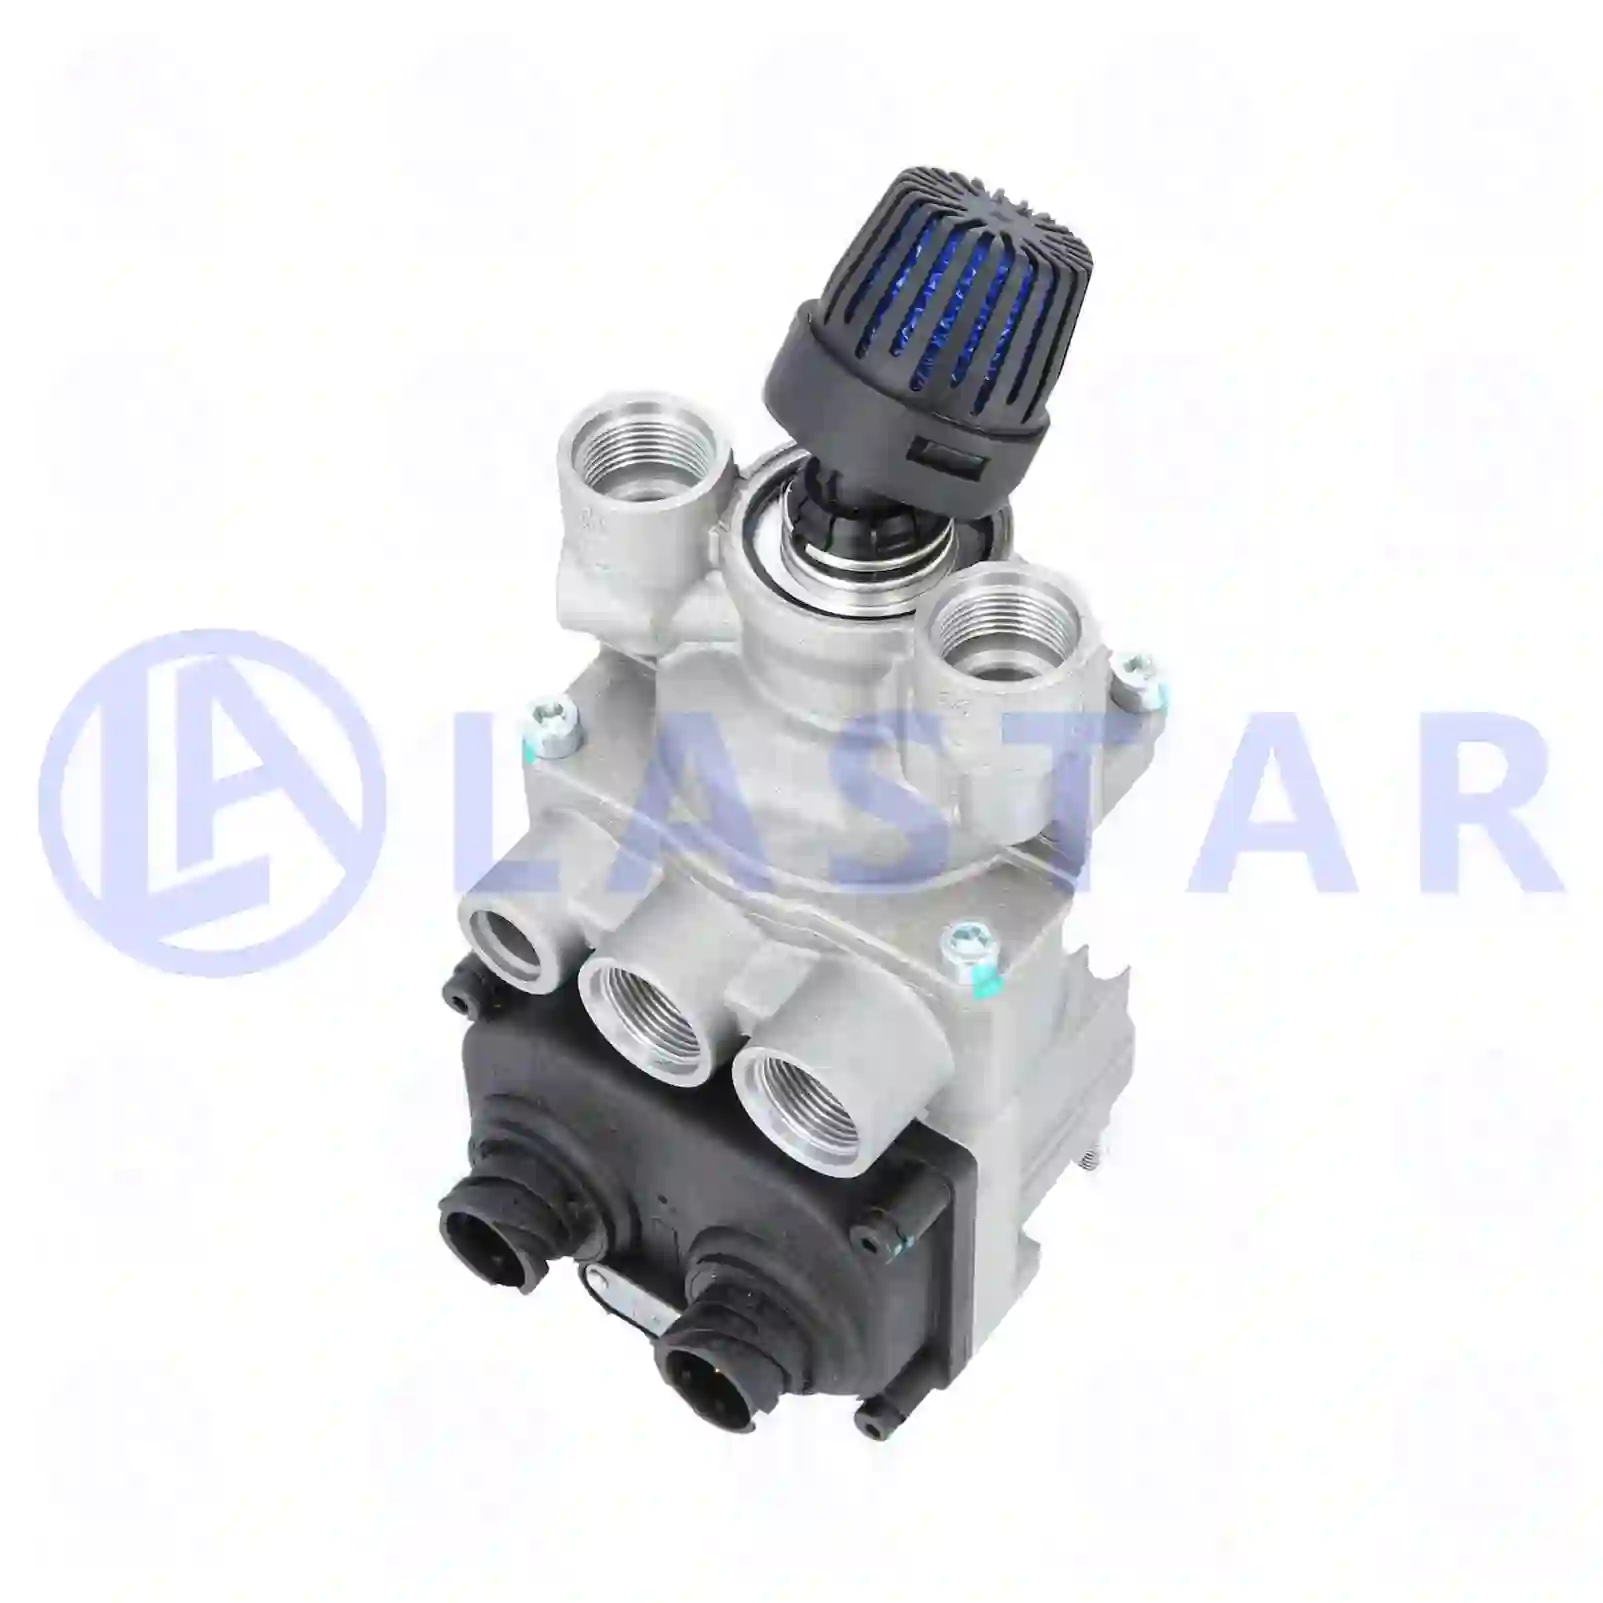 Foot brake valve, EBS, 77713937, 1315685, 1395722, 1395722A, 1395722R, 1455027, 1455027A, 1455027R, 1935123, 1102408500 ||  77713937 Lastar Spare Part | Truck Spare Parts, Auotomotive Spare Parts Foot brake valve, EBS, 77713937, 1315685, 1395722, 1395722A, 1395722R, 1455027, 1455027A, 1455027R, 1935123, 1102408500 ||  77713937 Lastar Spare Part | Truck Spare Parts, Auotomotive Spare Parts